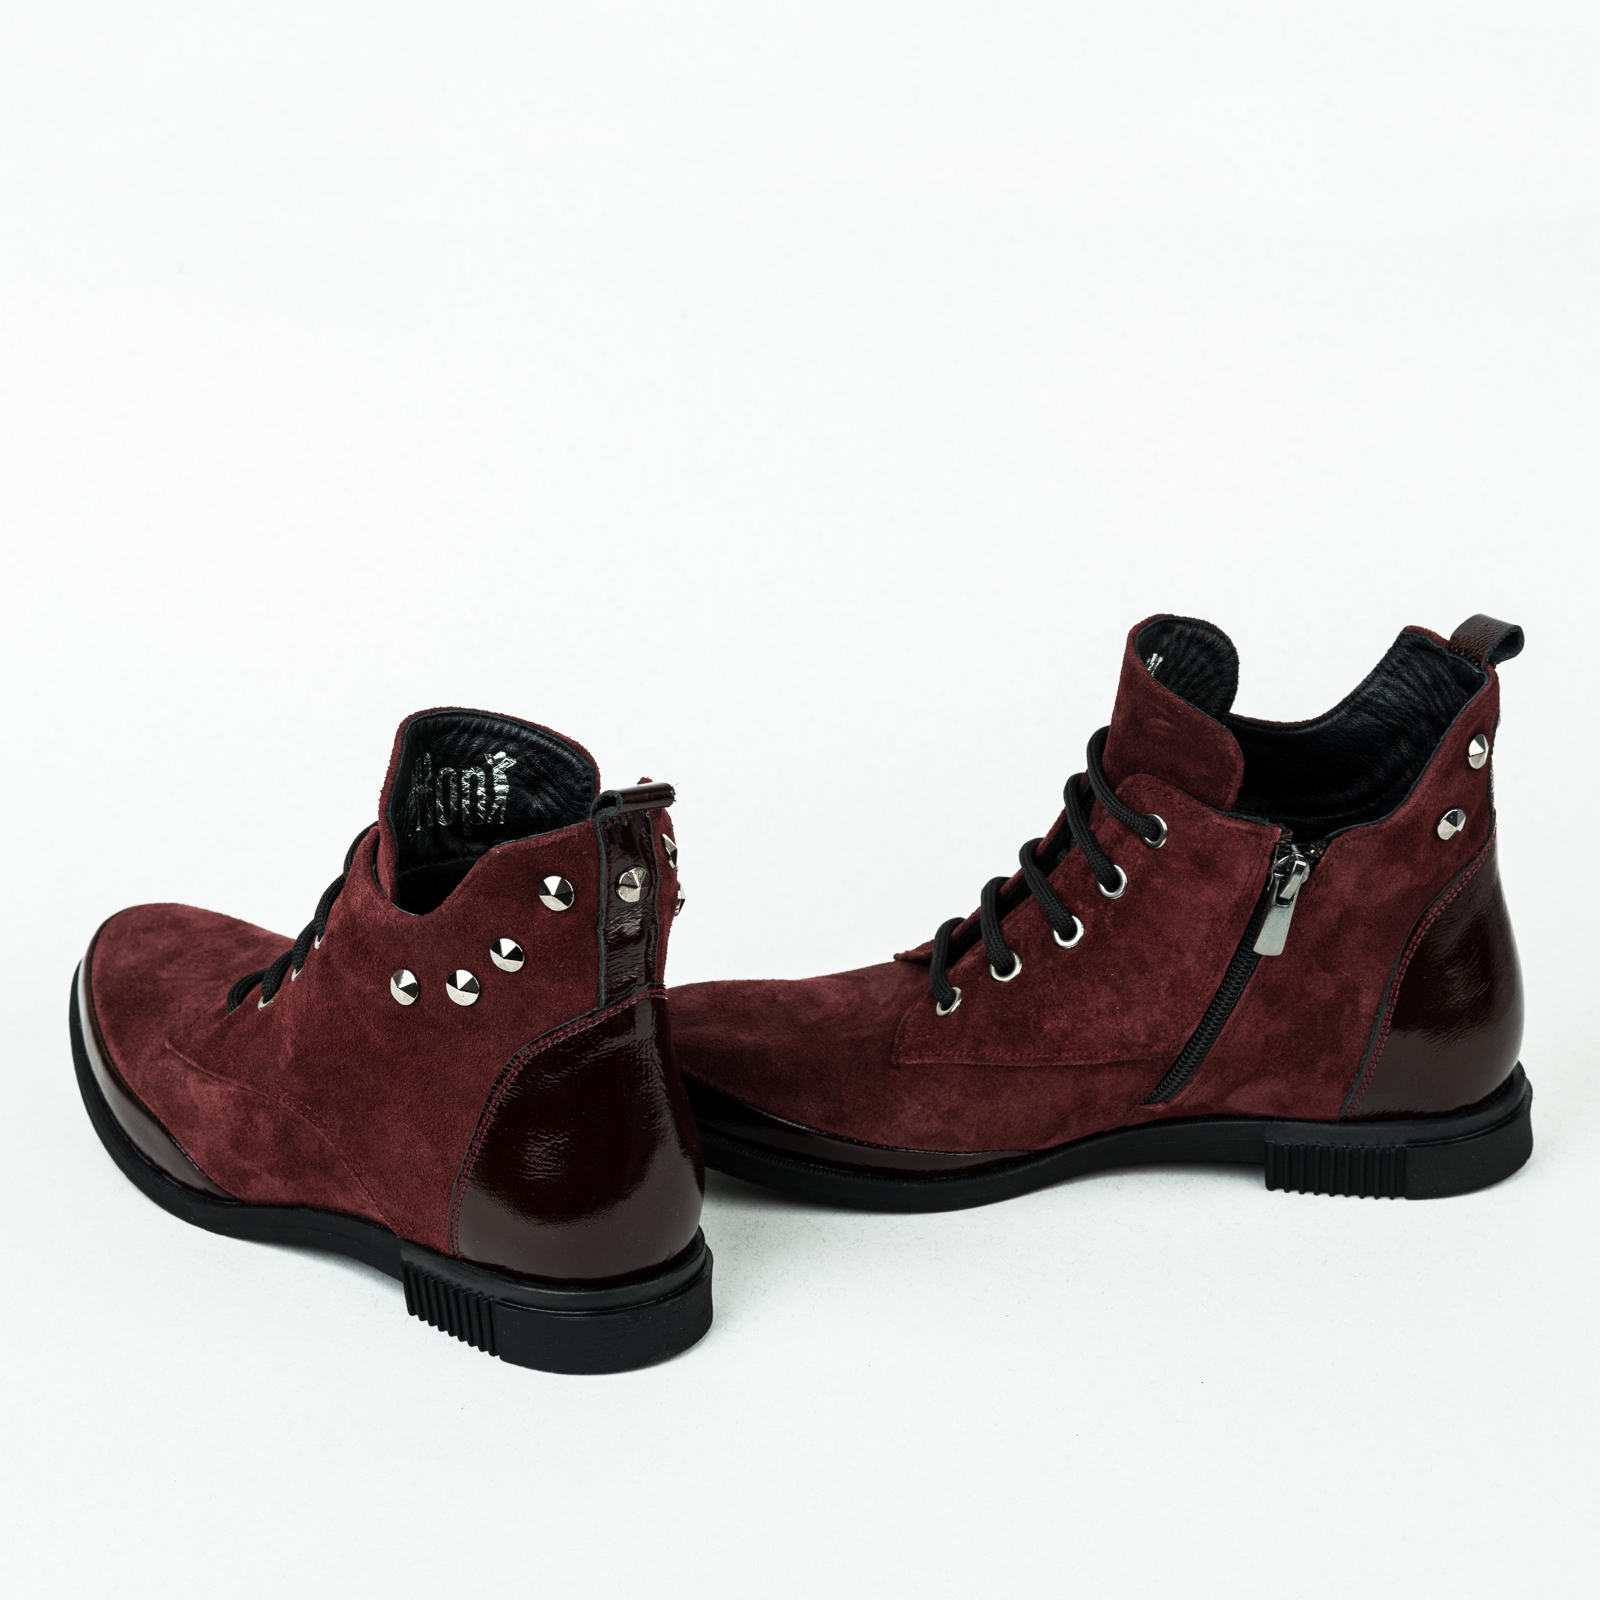 Leather ankle boots B038 - WINE RED